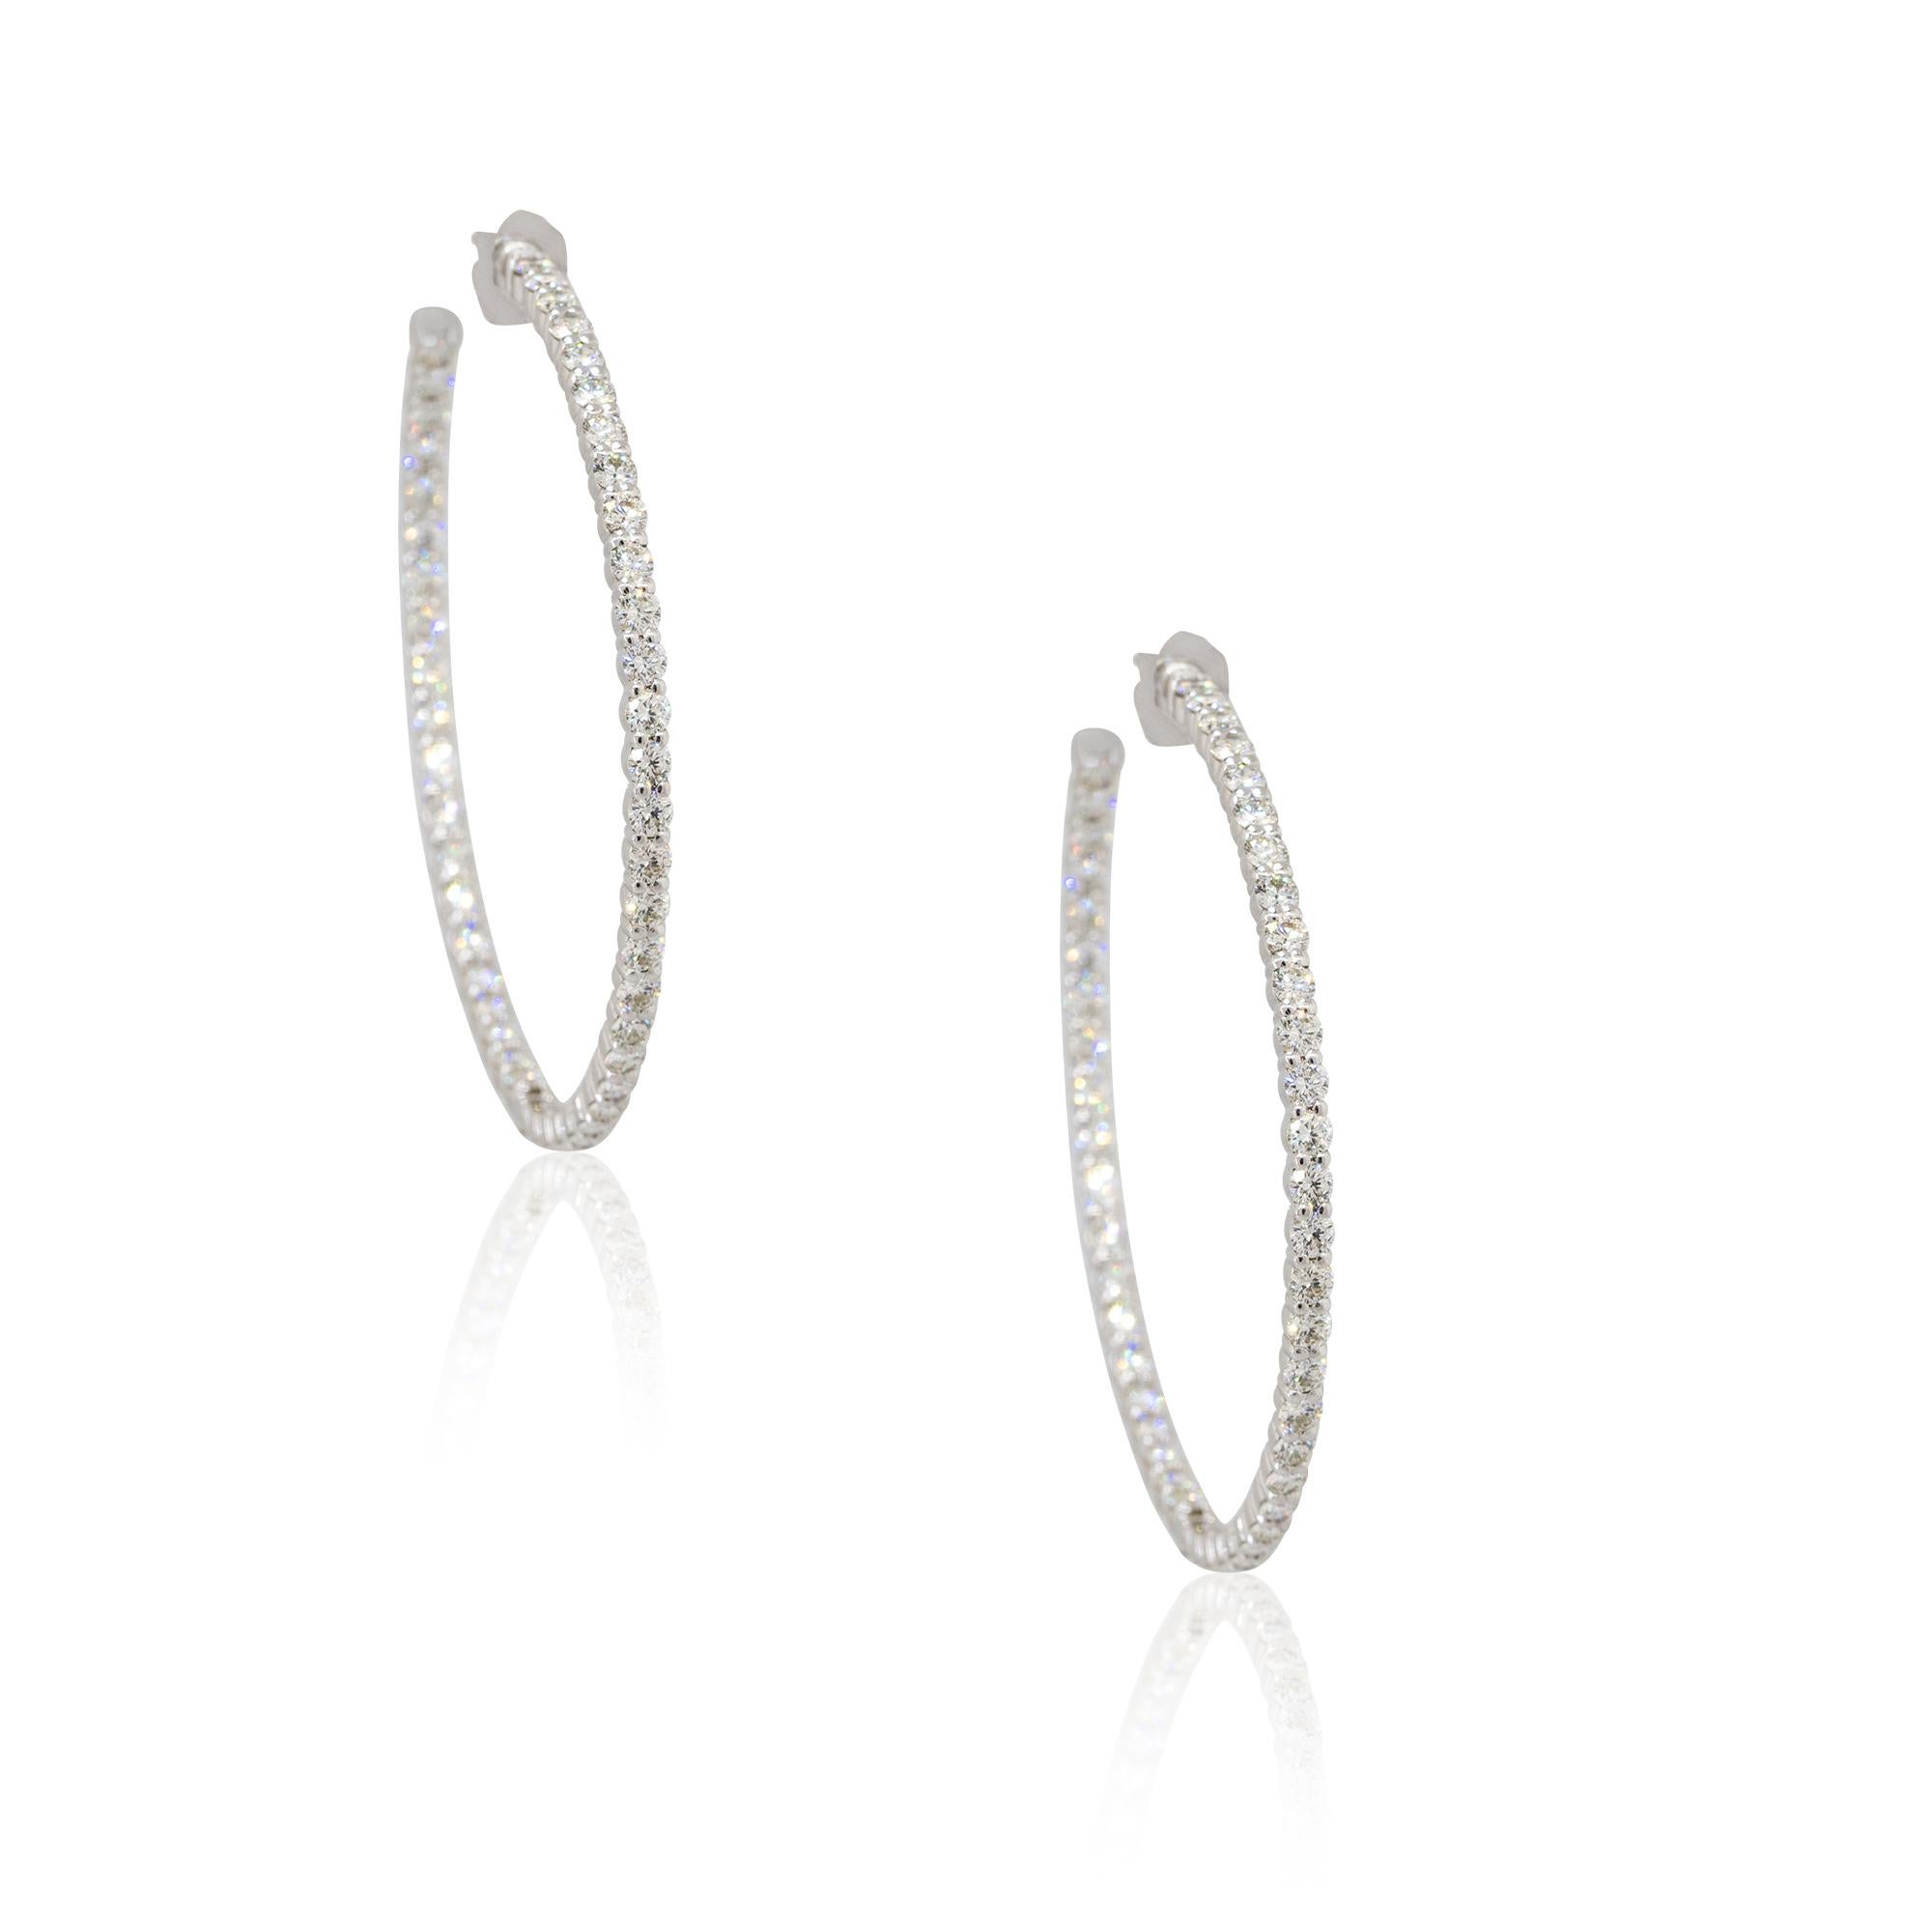 Material: 14k White Gold
Diamond Details: Approx. 5.25ctw of round cut Diamonds. Diamonds are G/H in color and VS in clarity. 50 stones total
Earring Measurements: 49mm x 50mm x 2.5mm
Total Weight: 12g (7.7dwt) 
Earring backs: tension